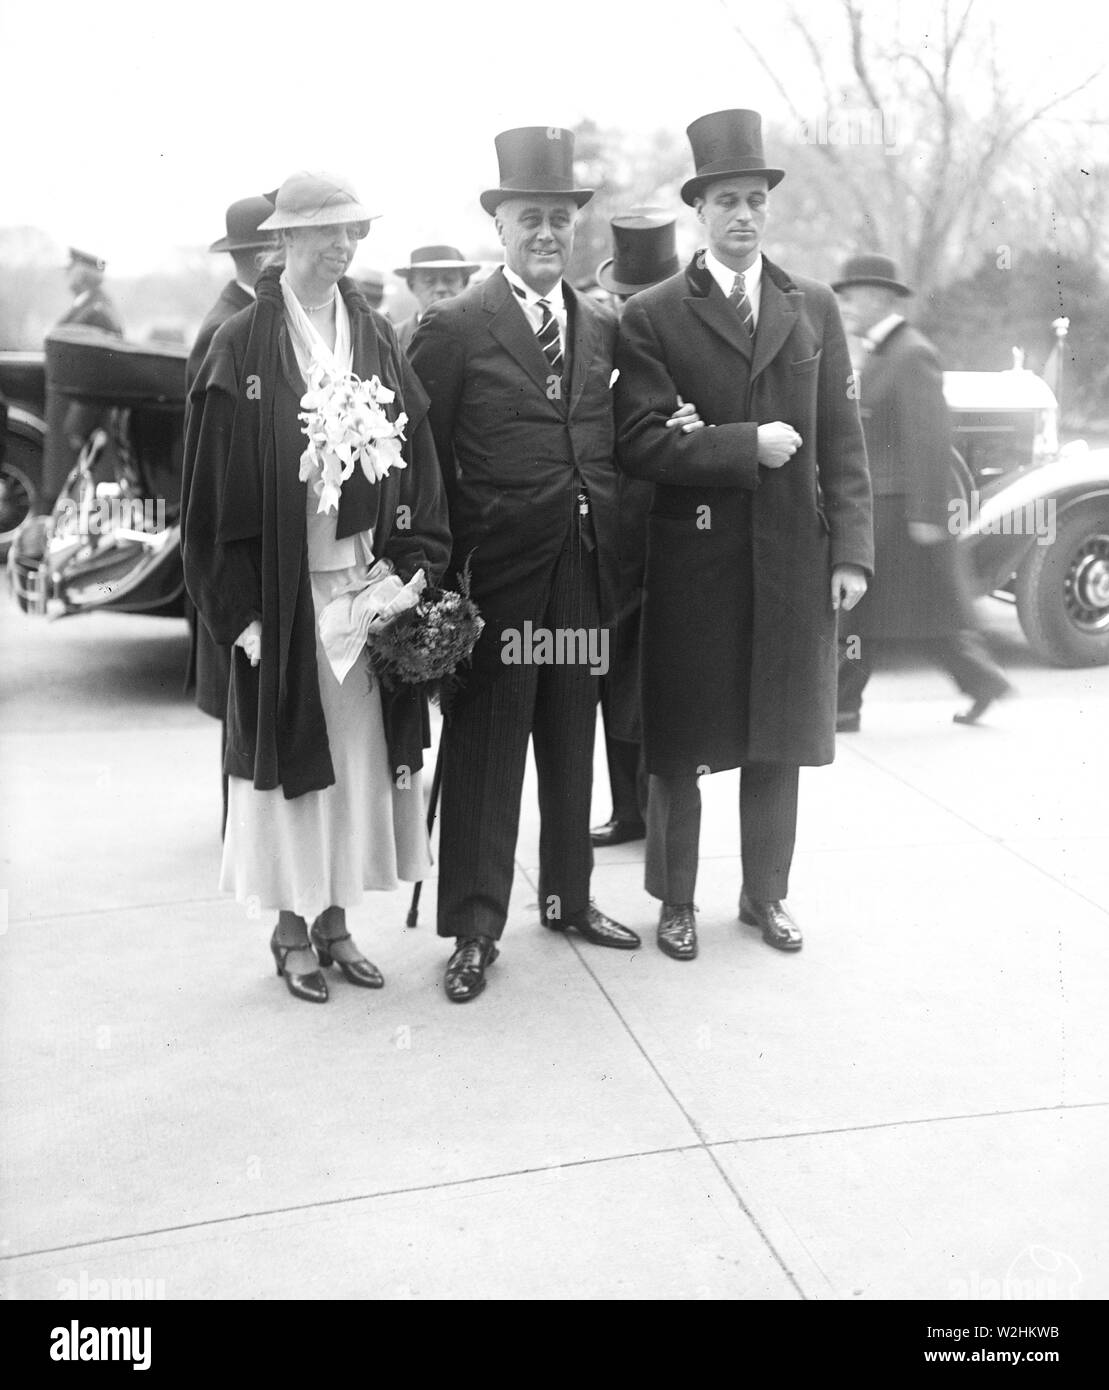 Franklin D. Roosevelt - Franklin D. Roosevelt inauguration. Eleanor Roosevelt and Franklin D. Roosevelt March 4, 1933 Stock Photo